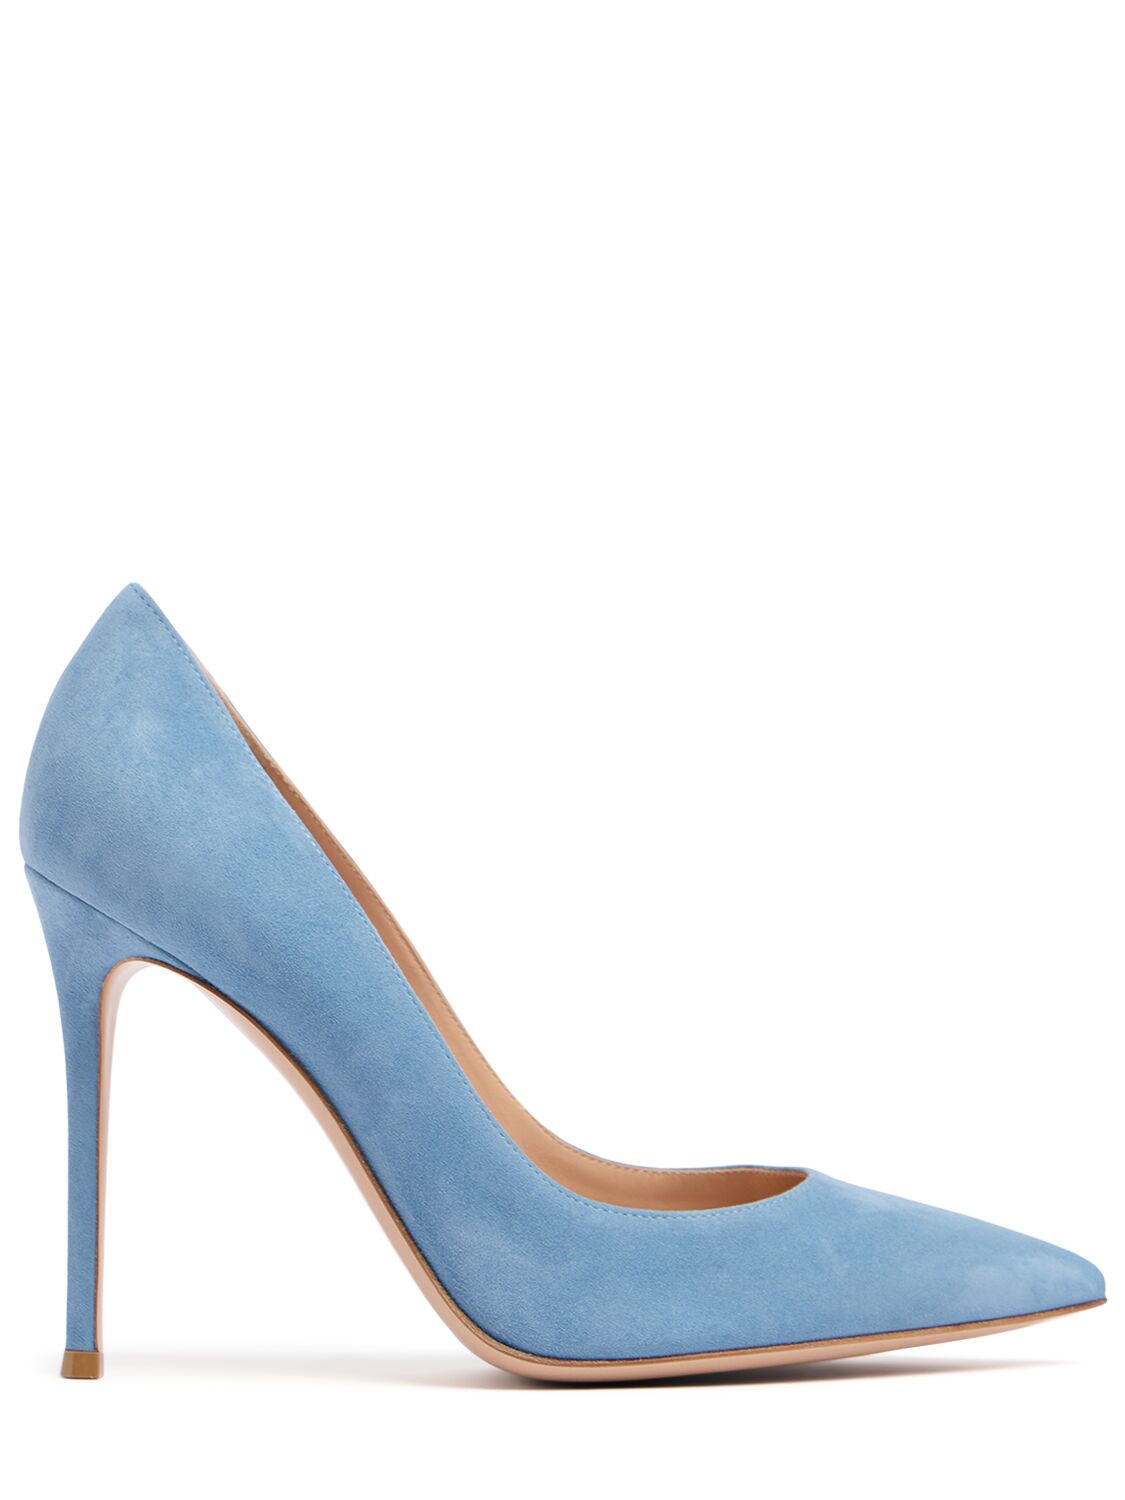 Gianvito Rossi 105mm Gianvito Suede Pumps In Antibes